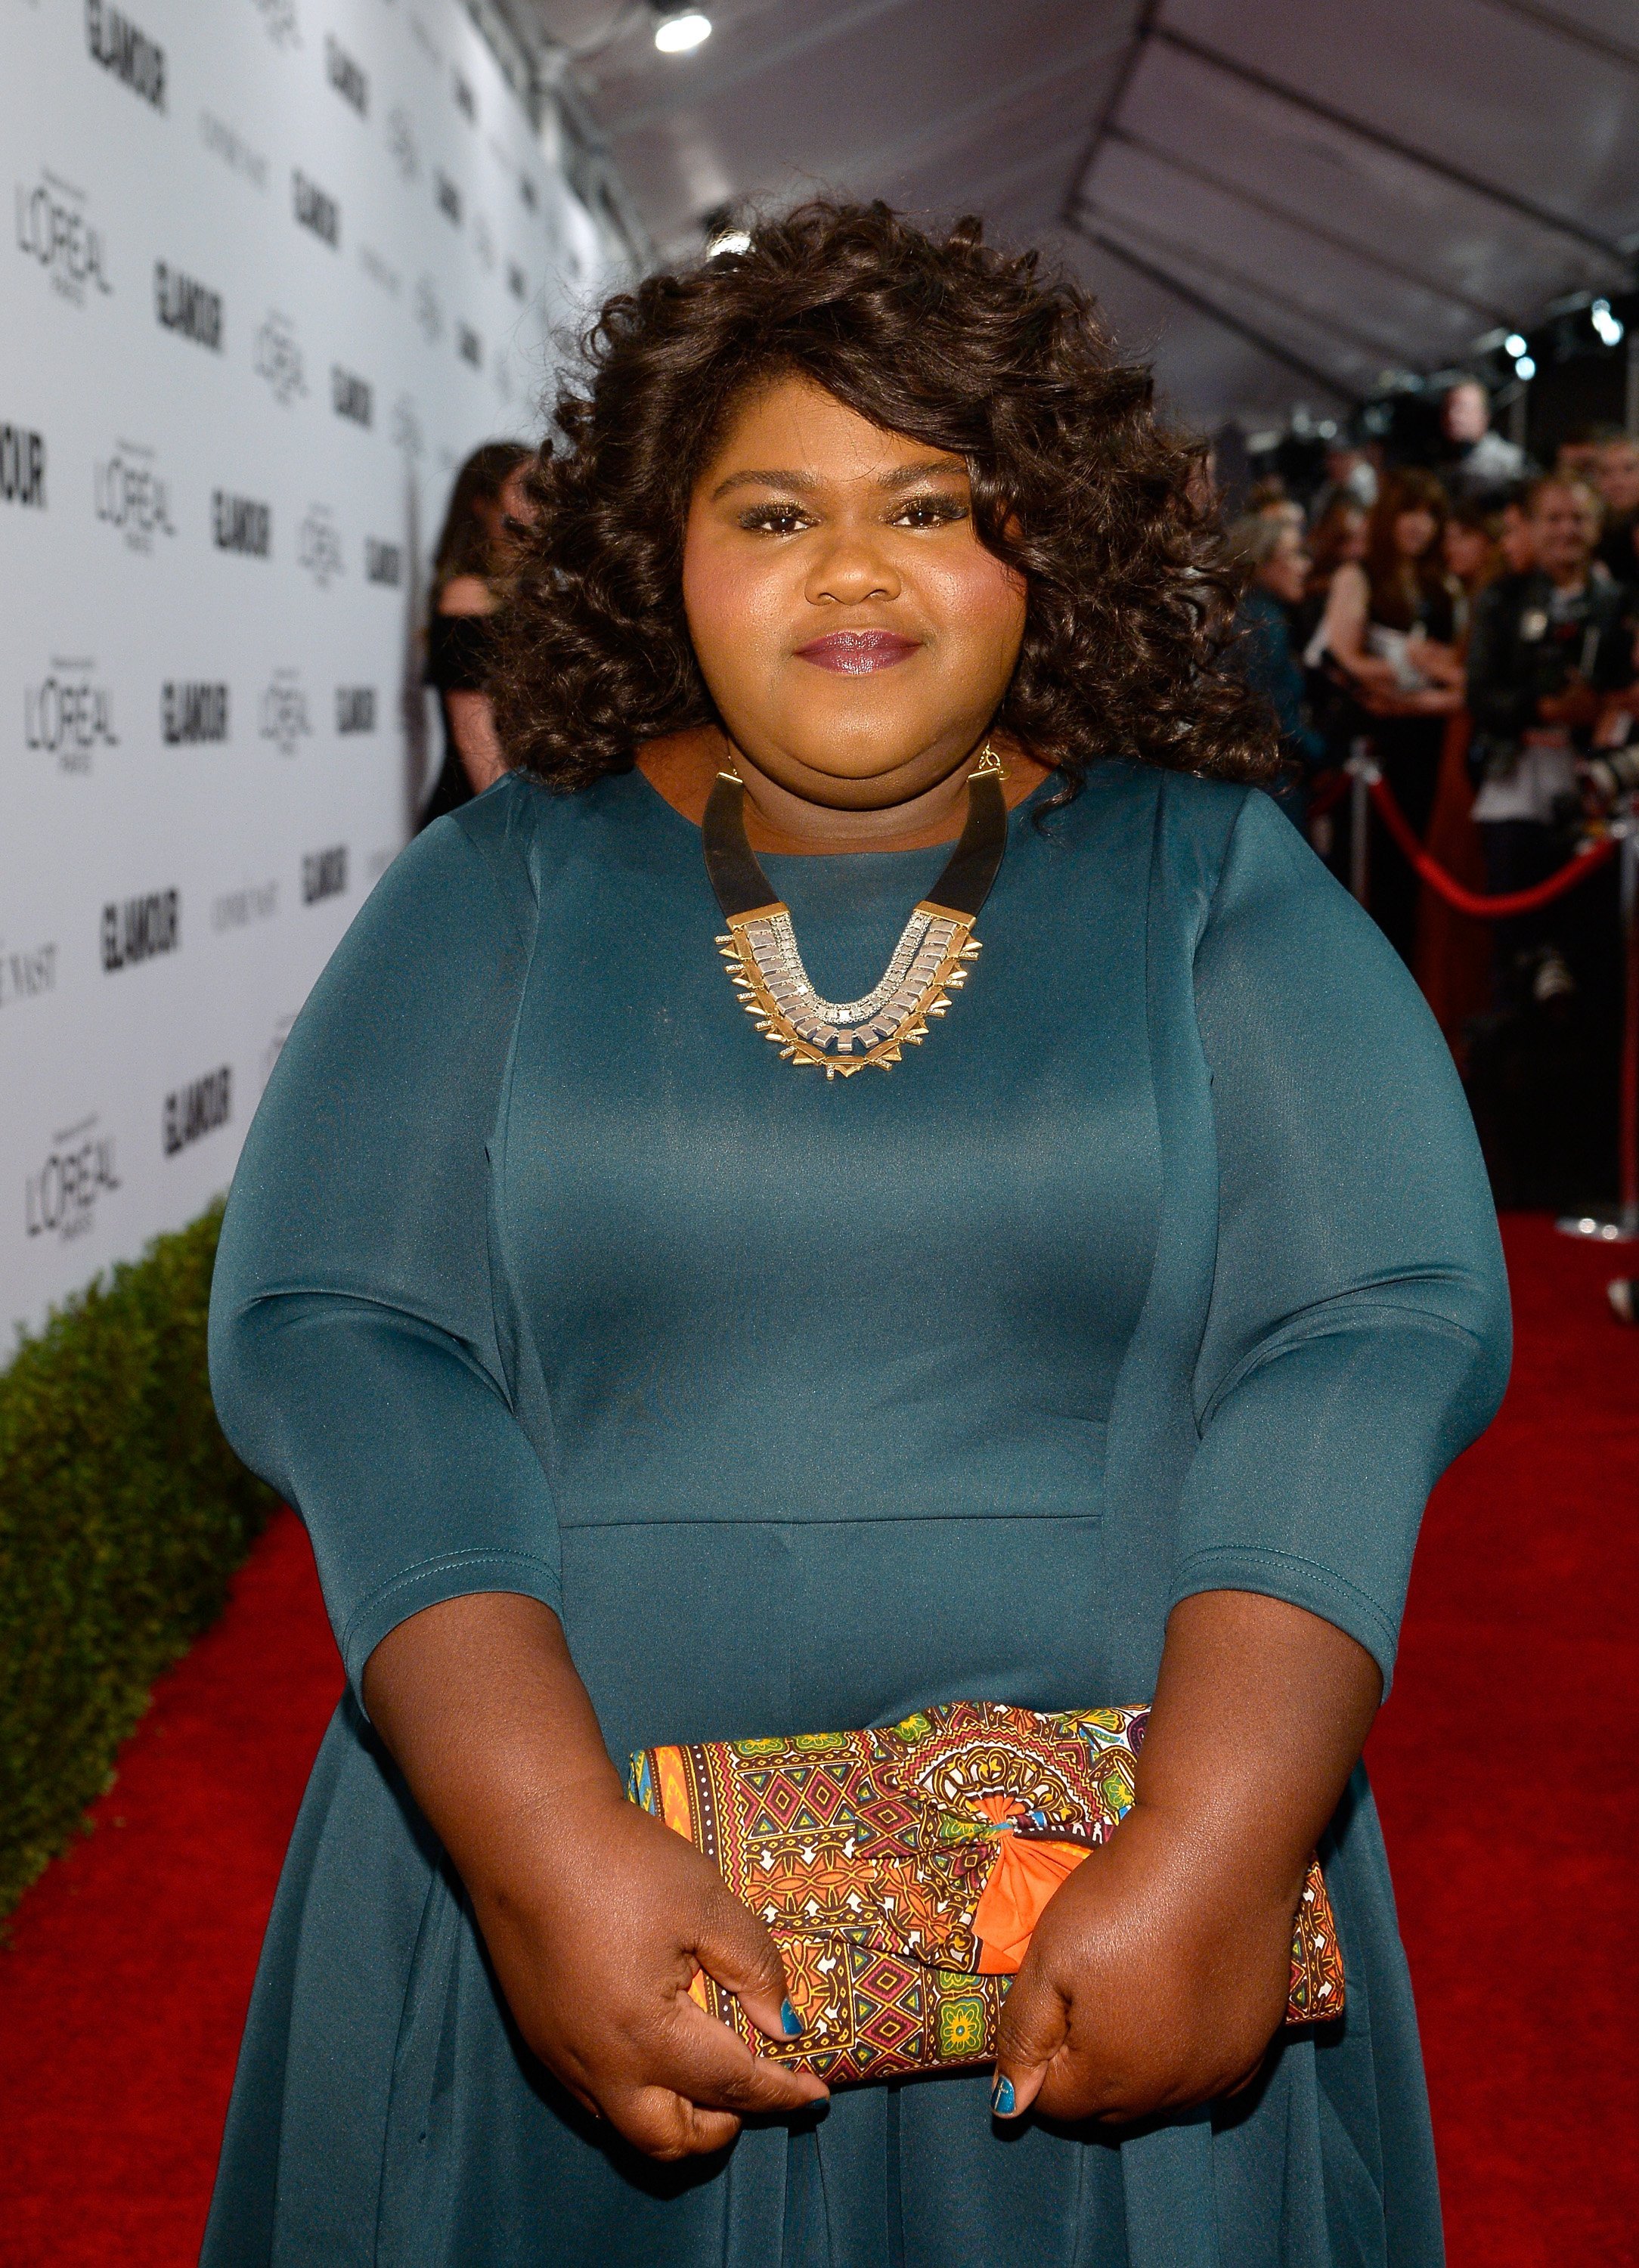 Gabourey Sidibe attends Glamour Women Of The Year on Nov. 14, 2016 in California | Photo: Getty Images